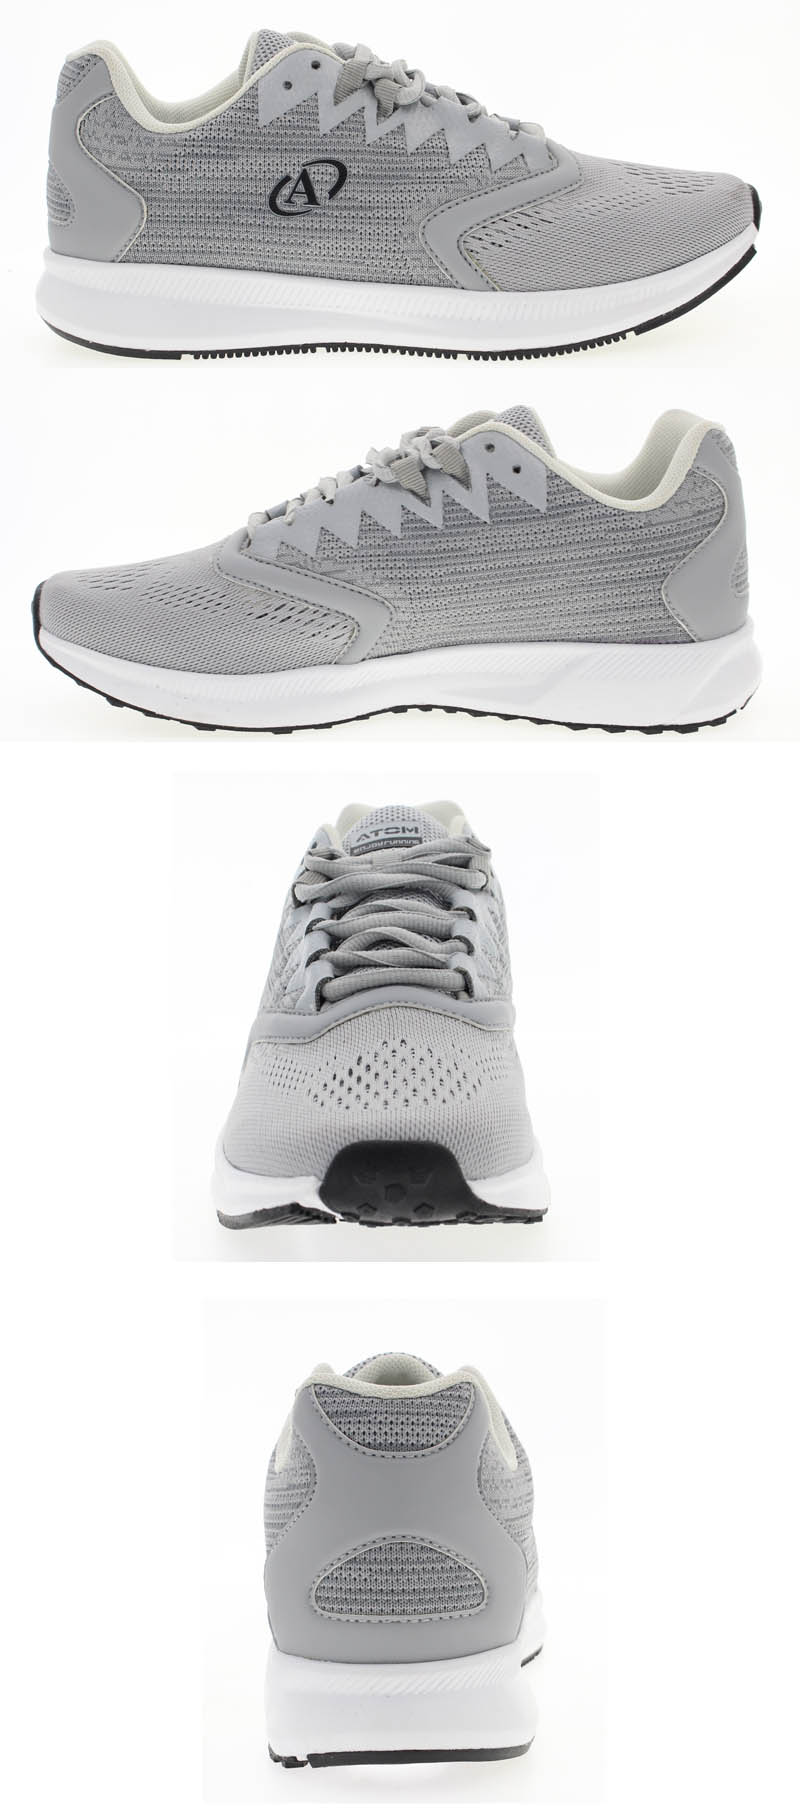 Light grey running shoes for you 